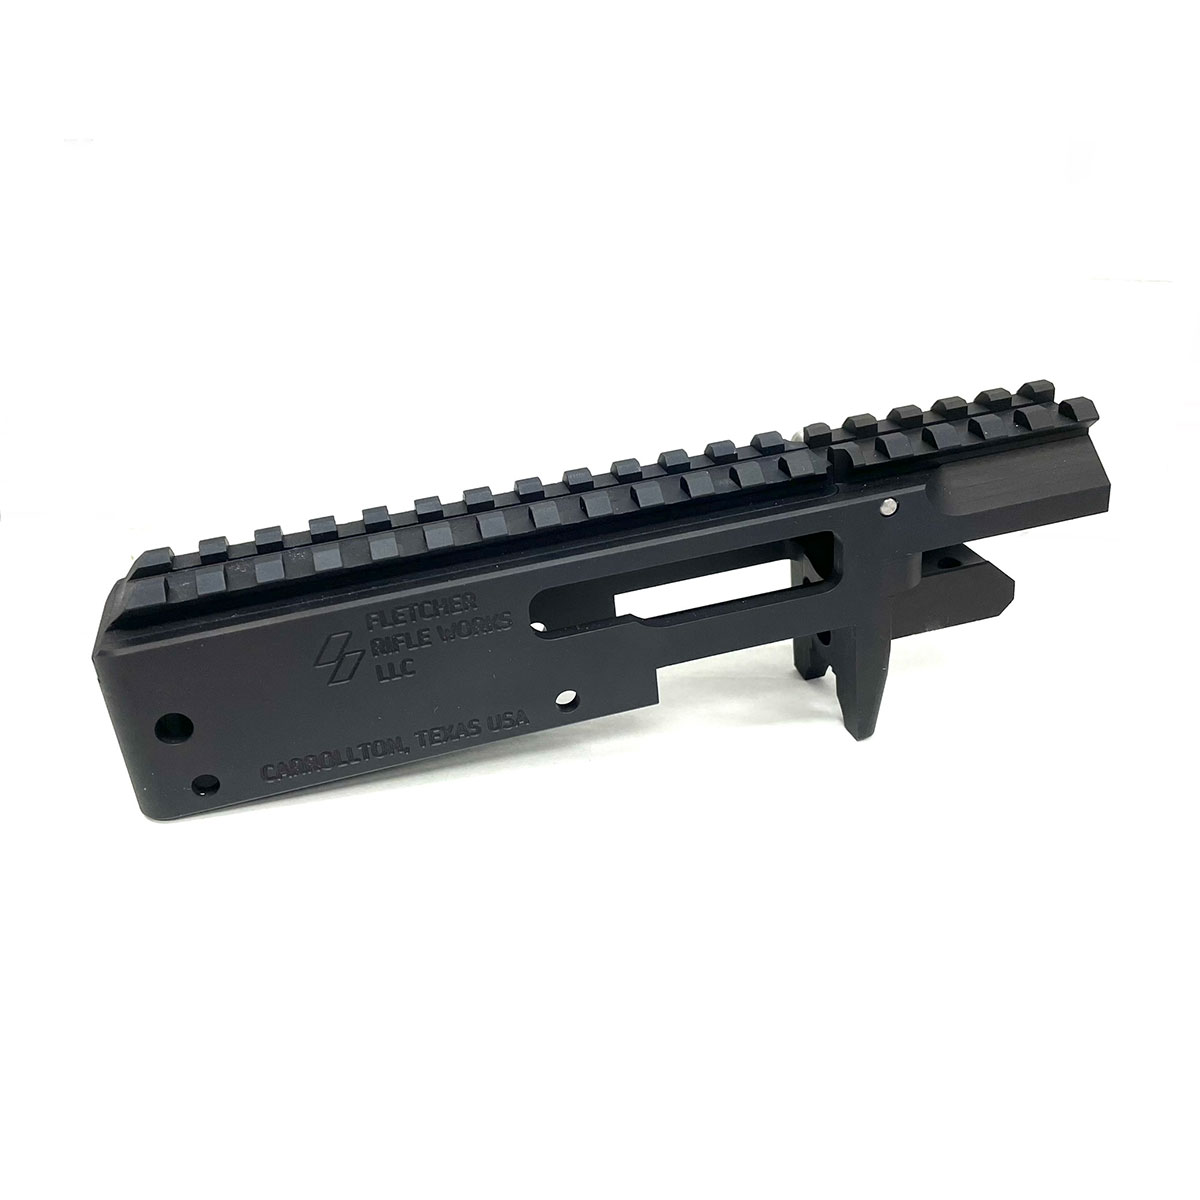 Fletcher Rifle Works LLC - OPENTOP 11/22 STRIPPED RECEIVER FITS IRON SIGHTS ~ RUGER® 10/22